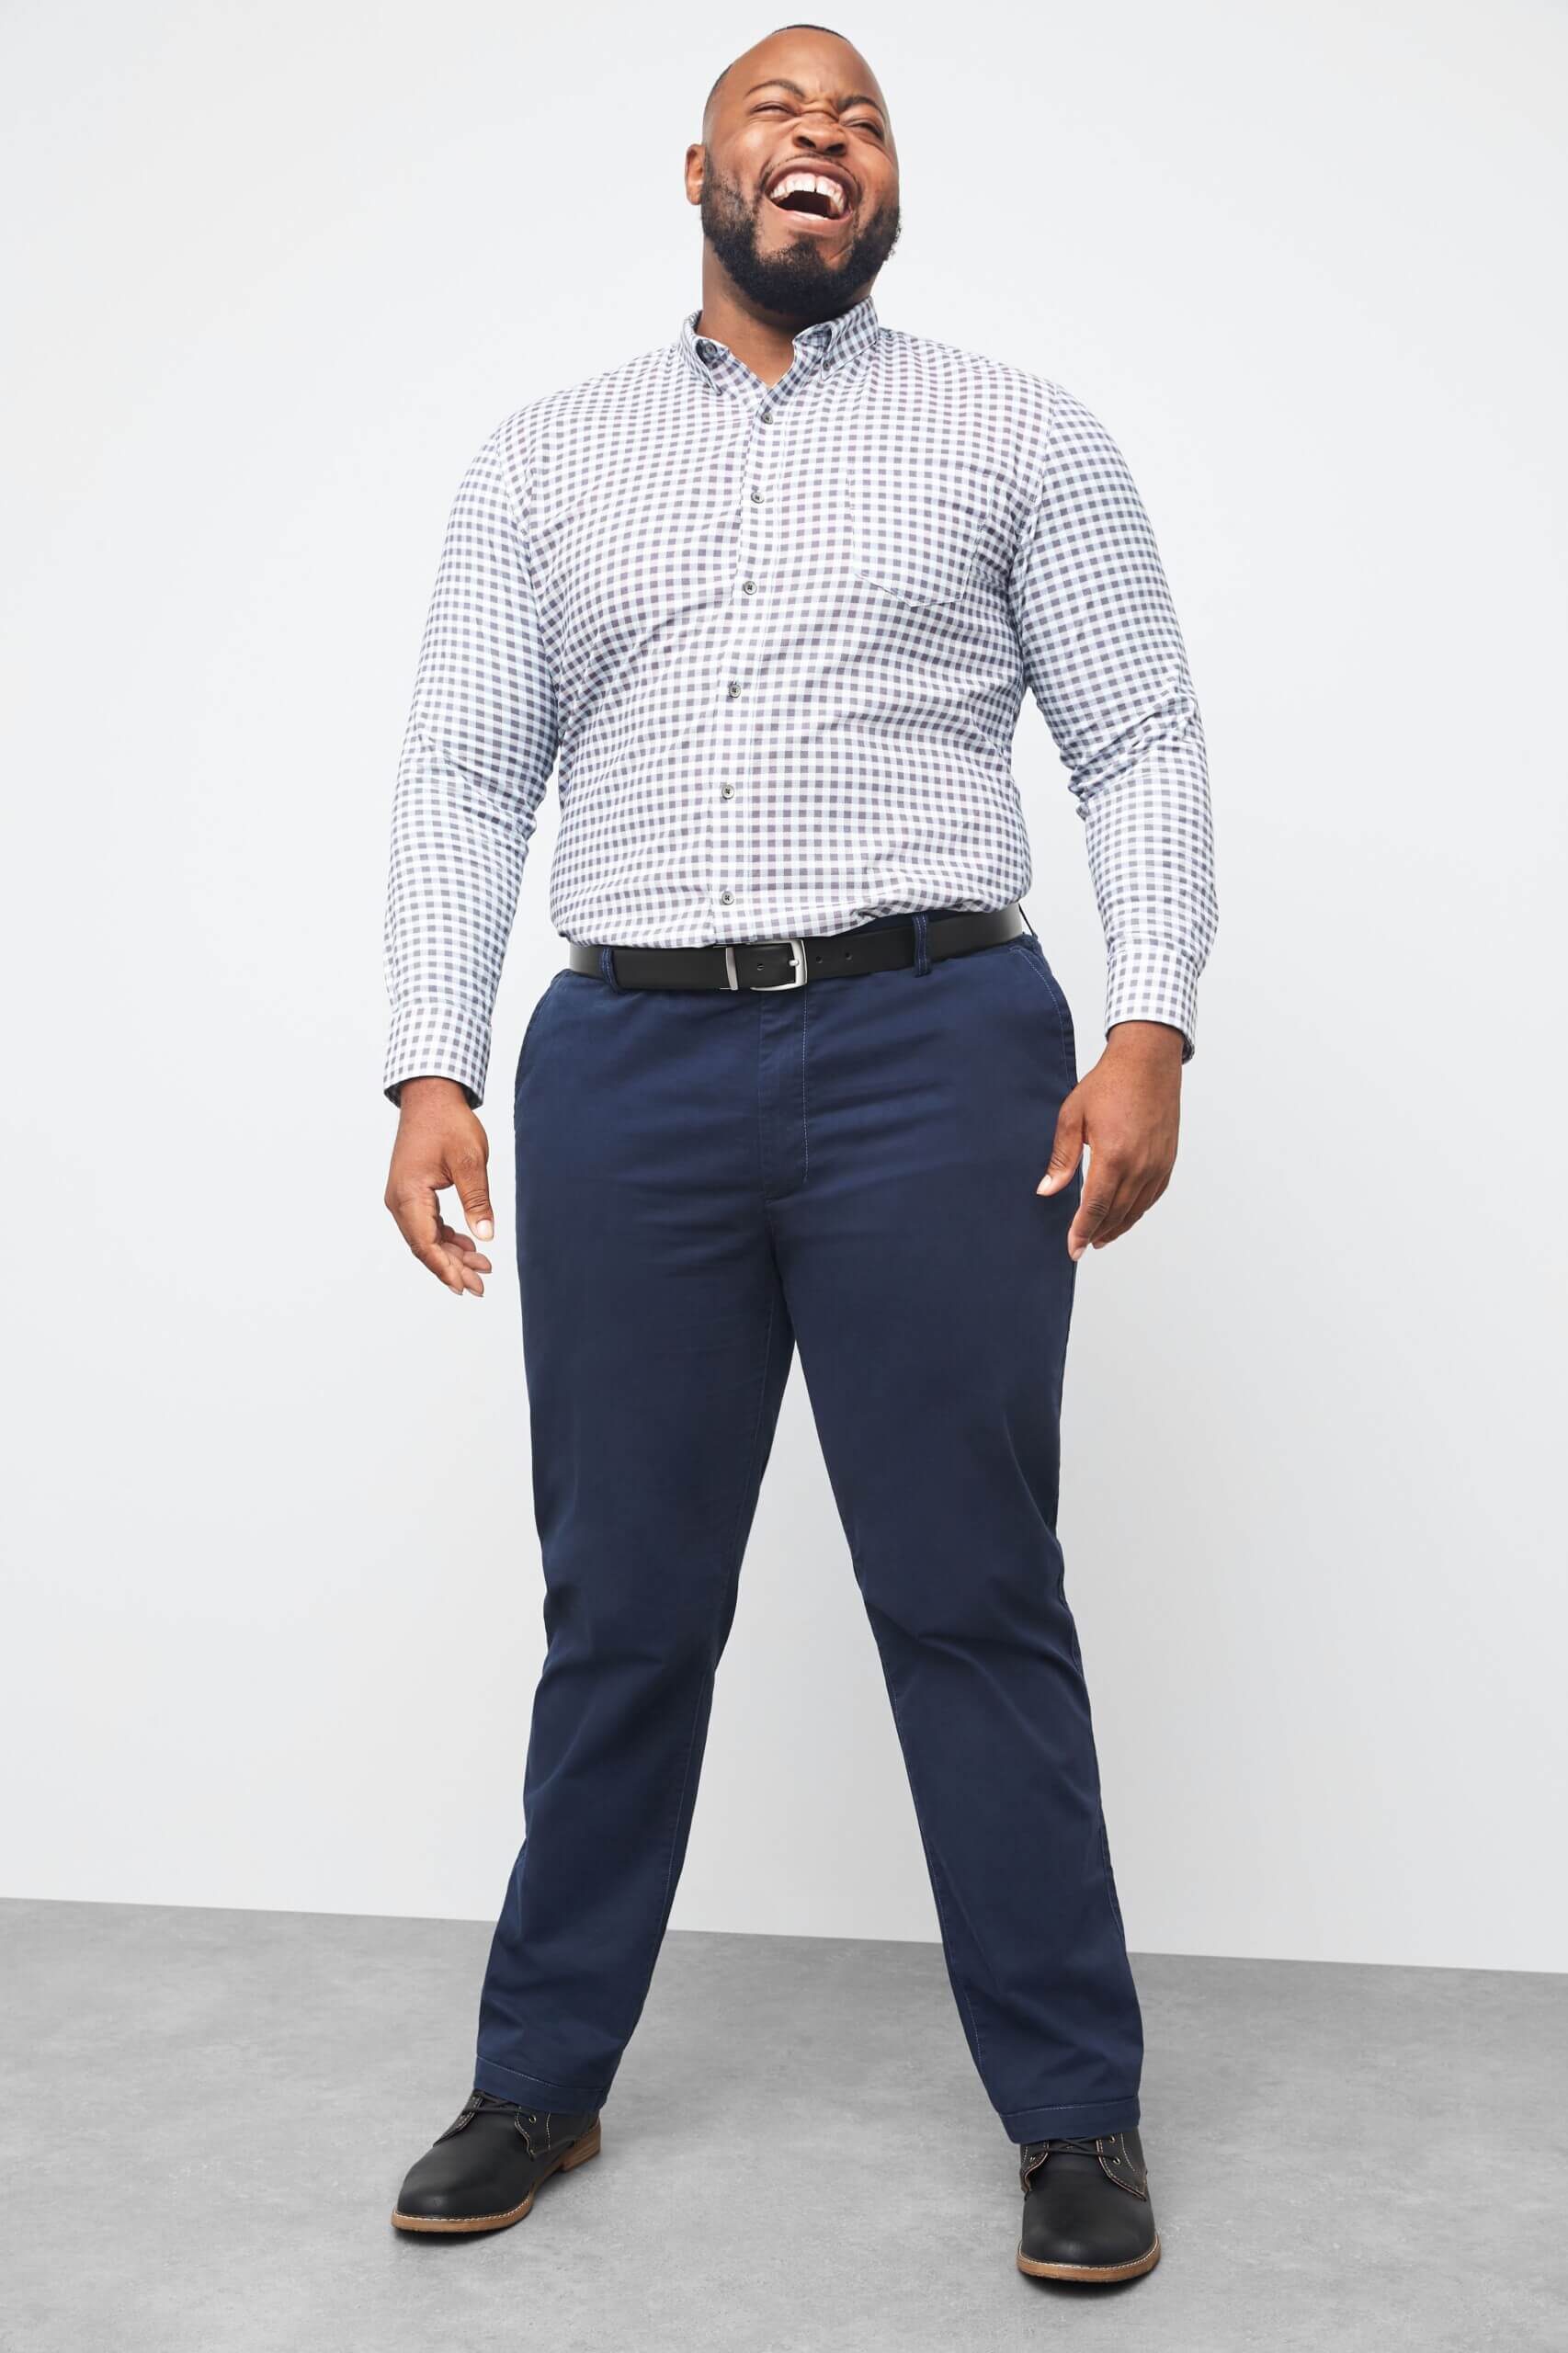 Big & Tall Clothing For Men